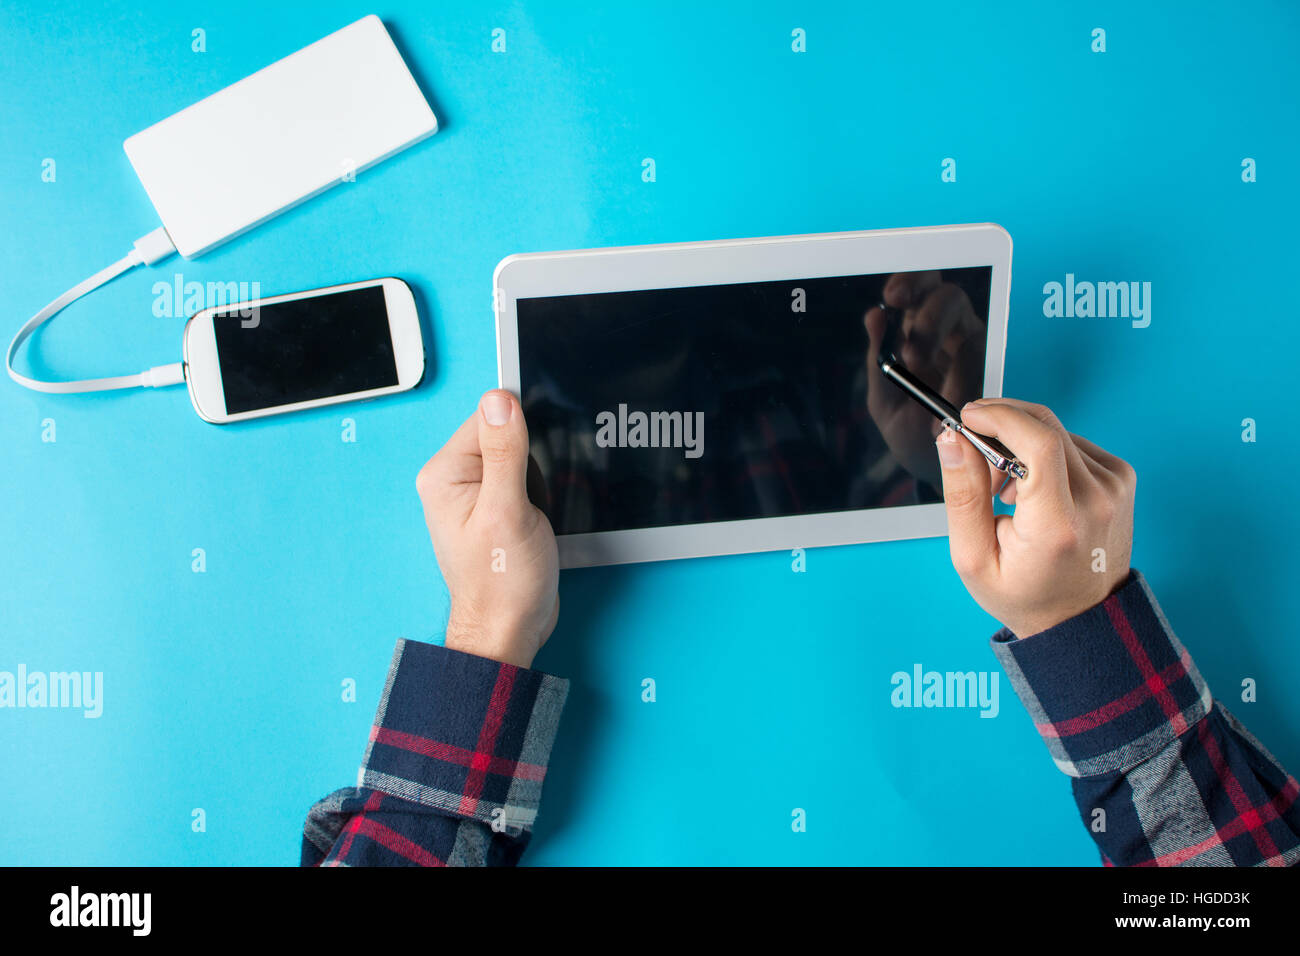 Man using a white tablet device at the office Stock Photo